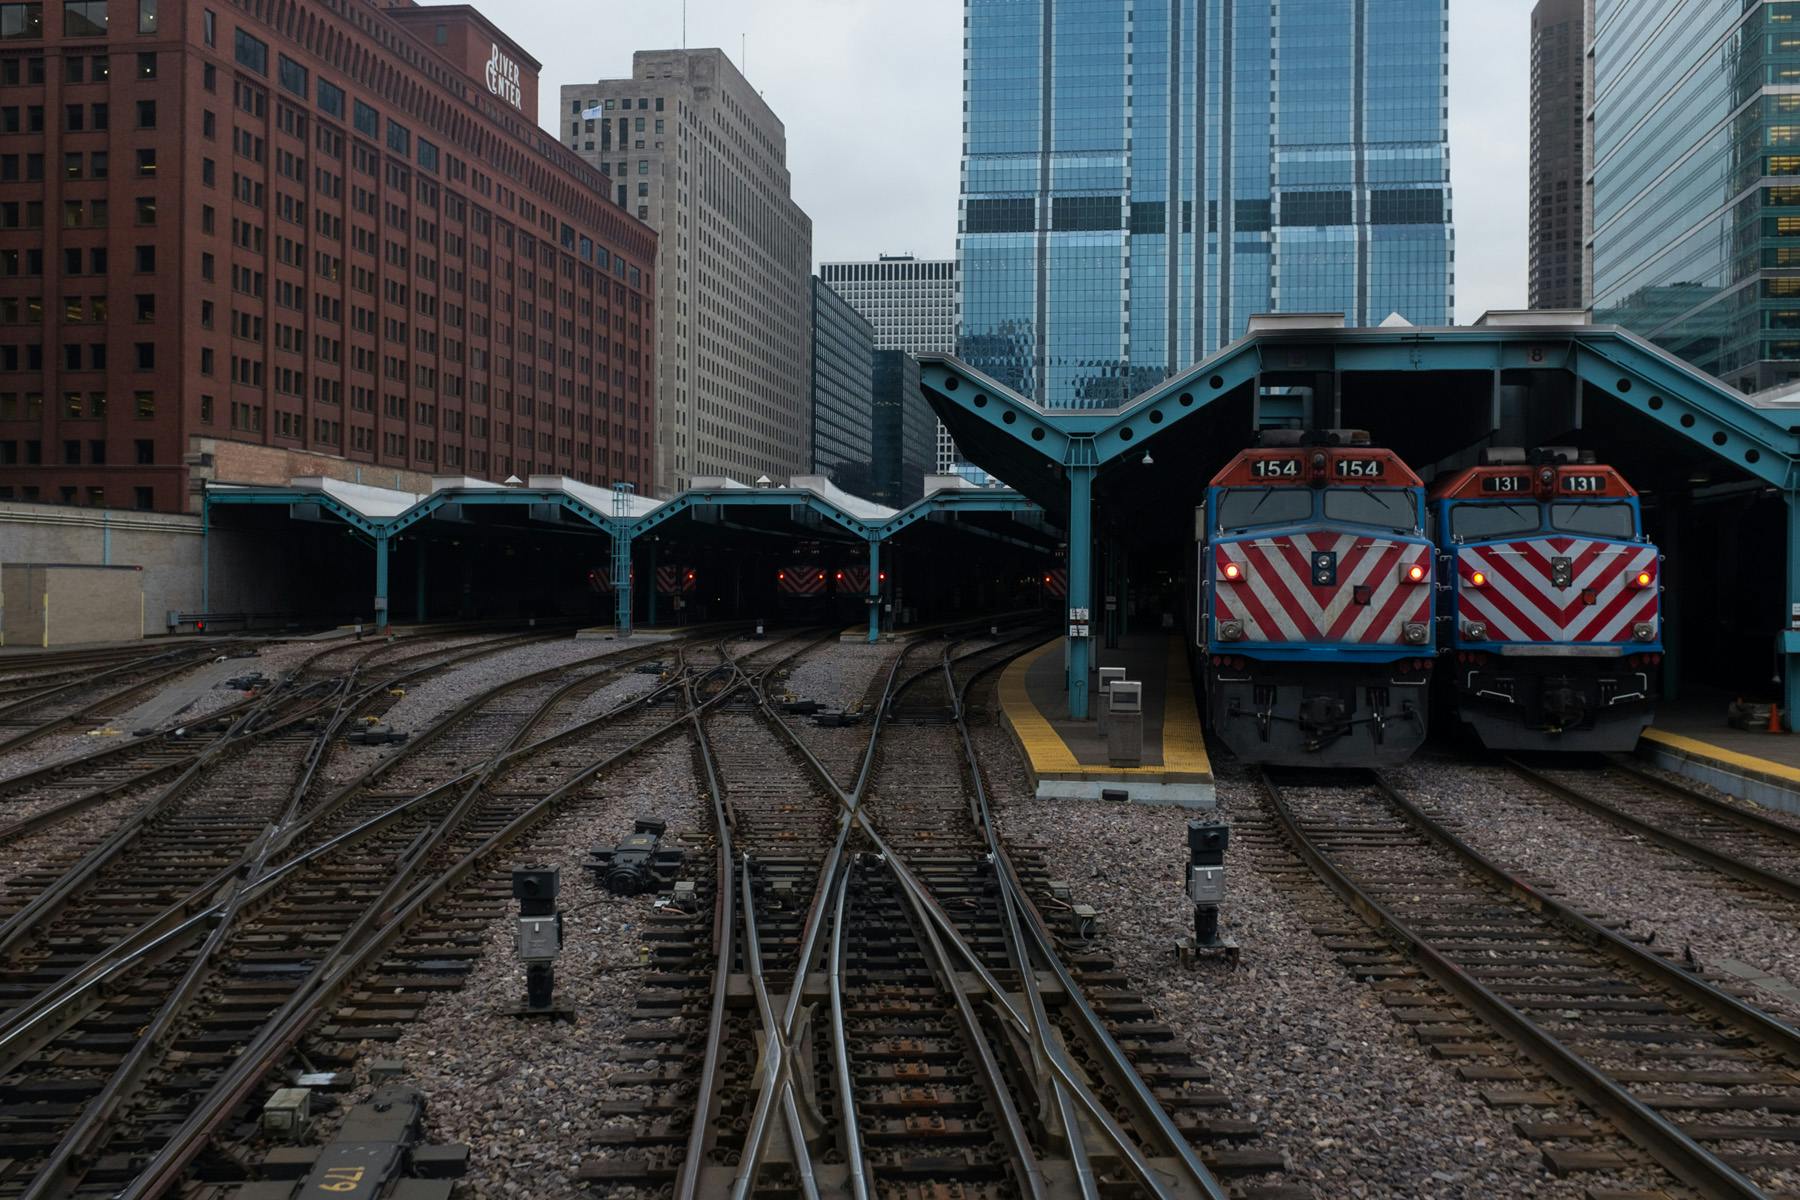 thumbnail for Metra trains Chicago